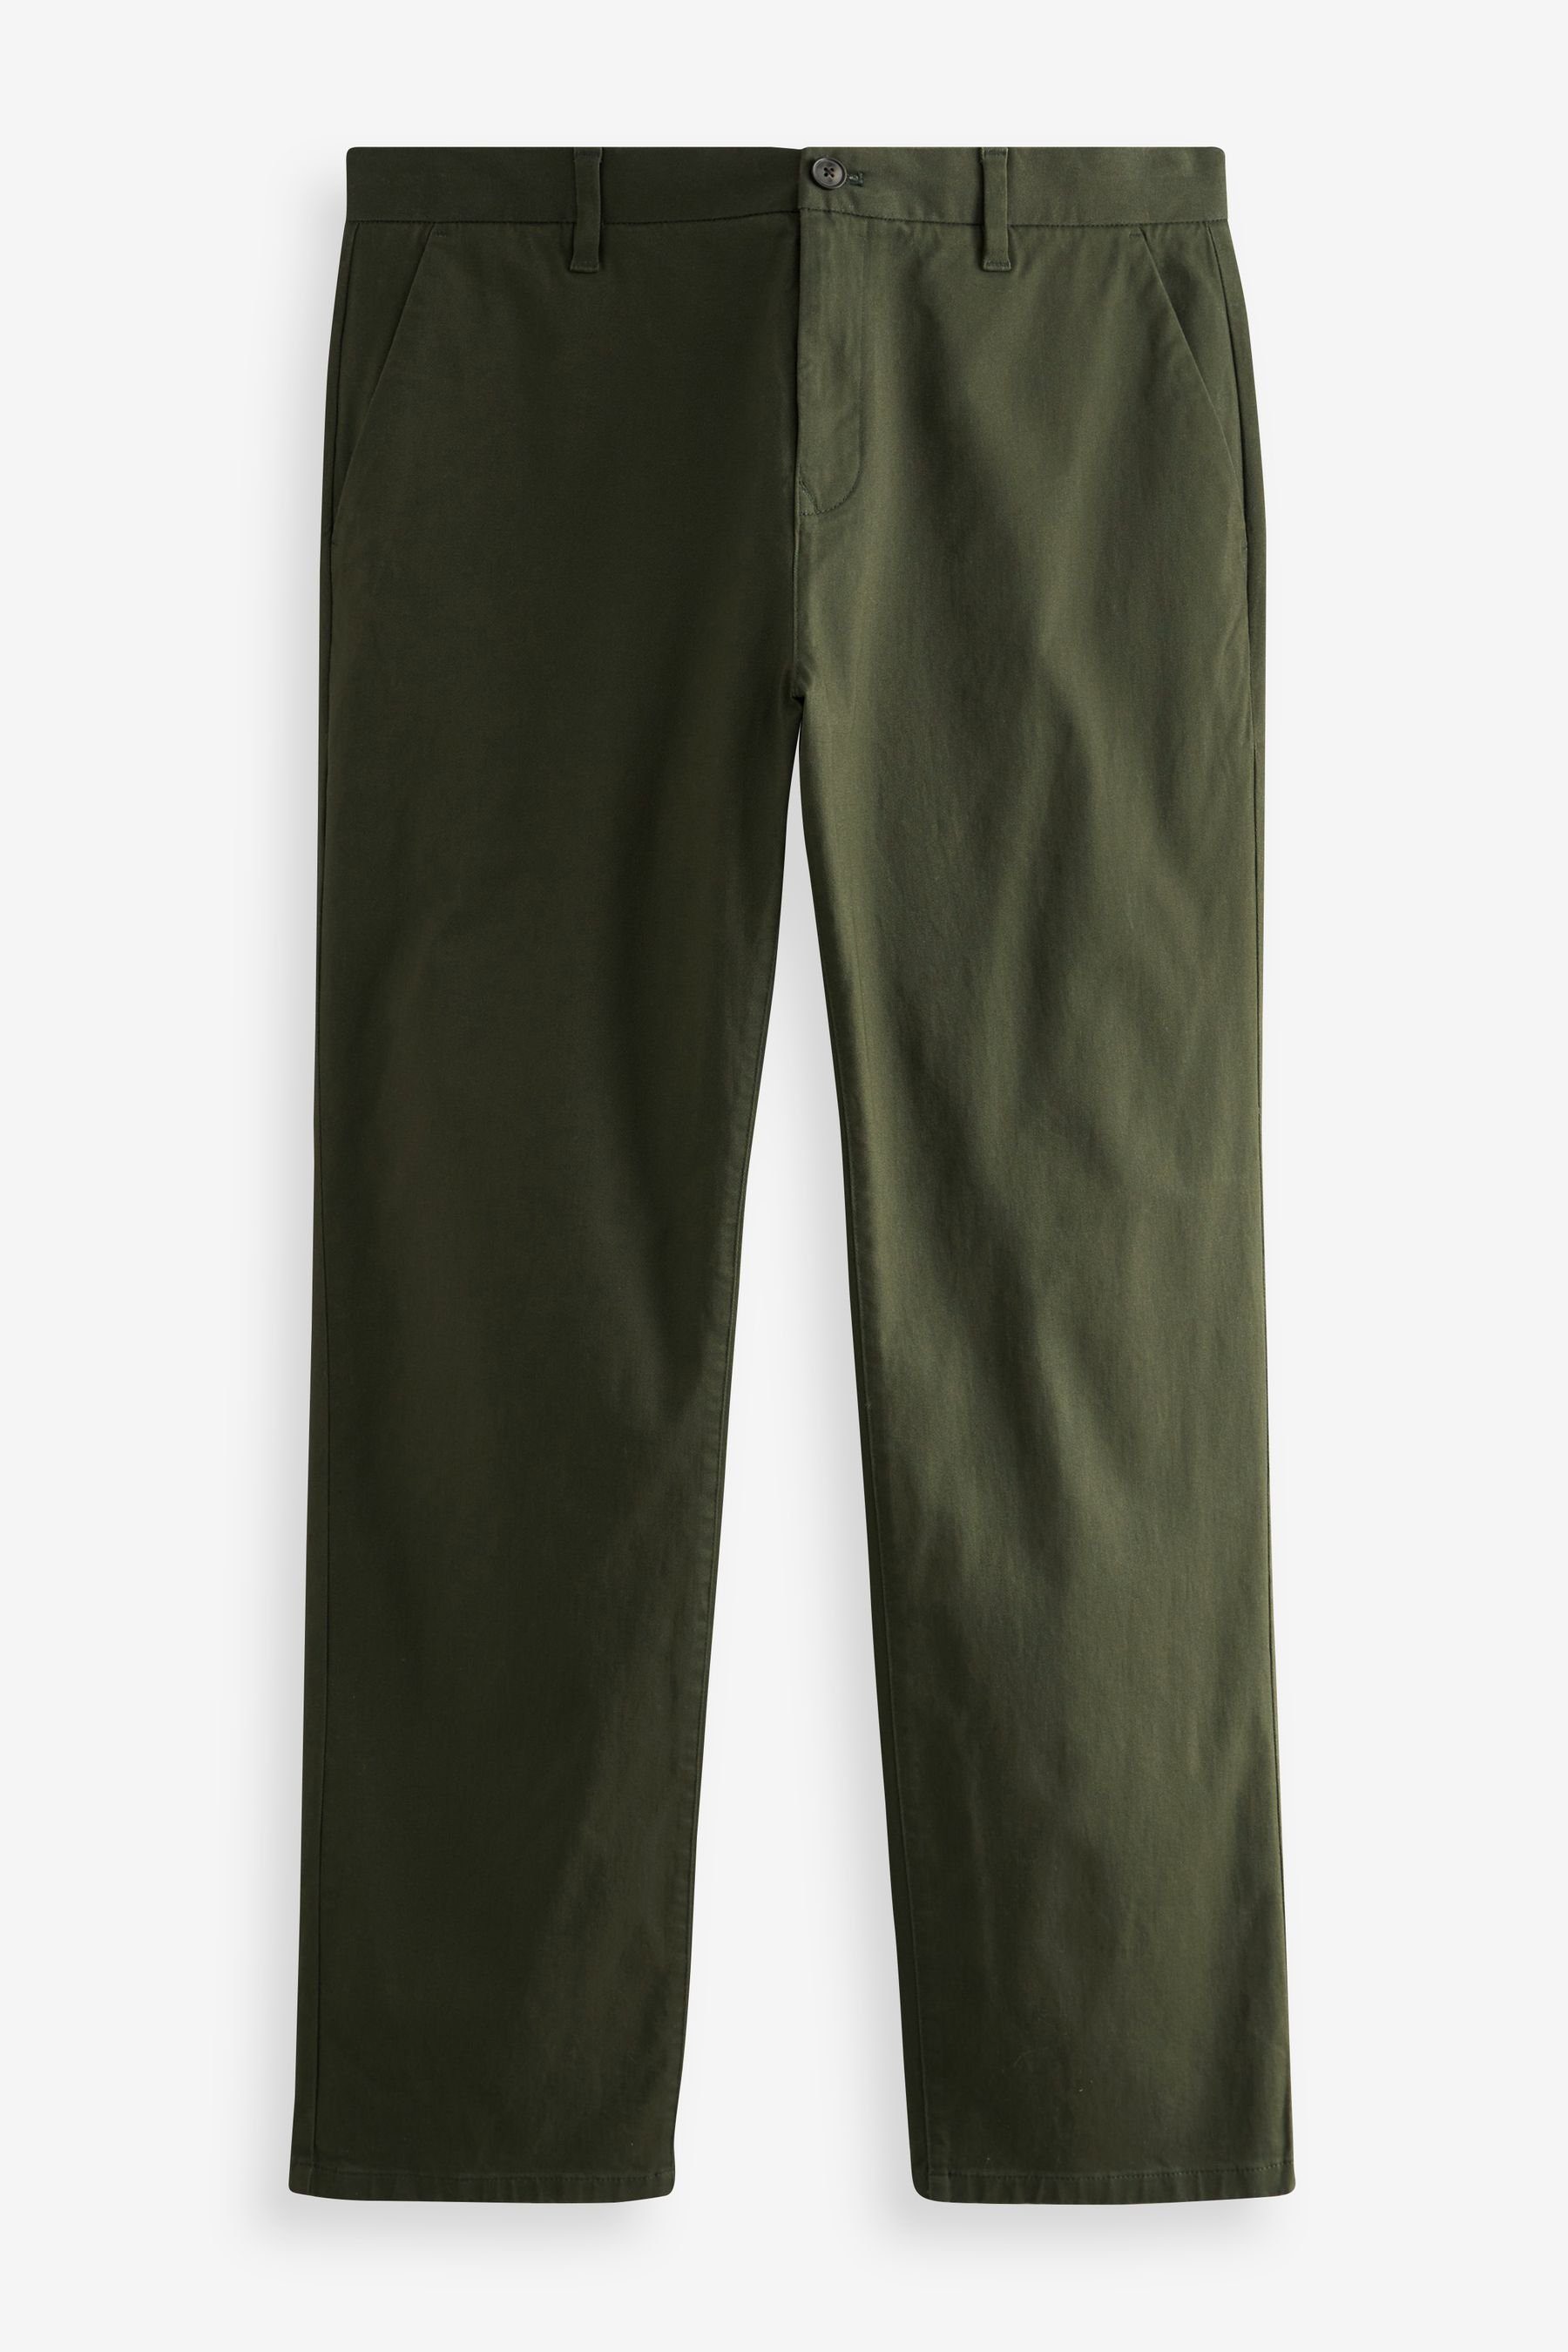 Green (1-tlg) im Relaxed Next Fit Chinohose Stretch-Chinohose Khaki